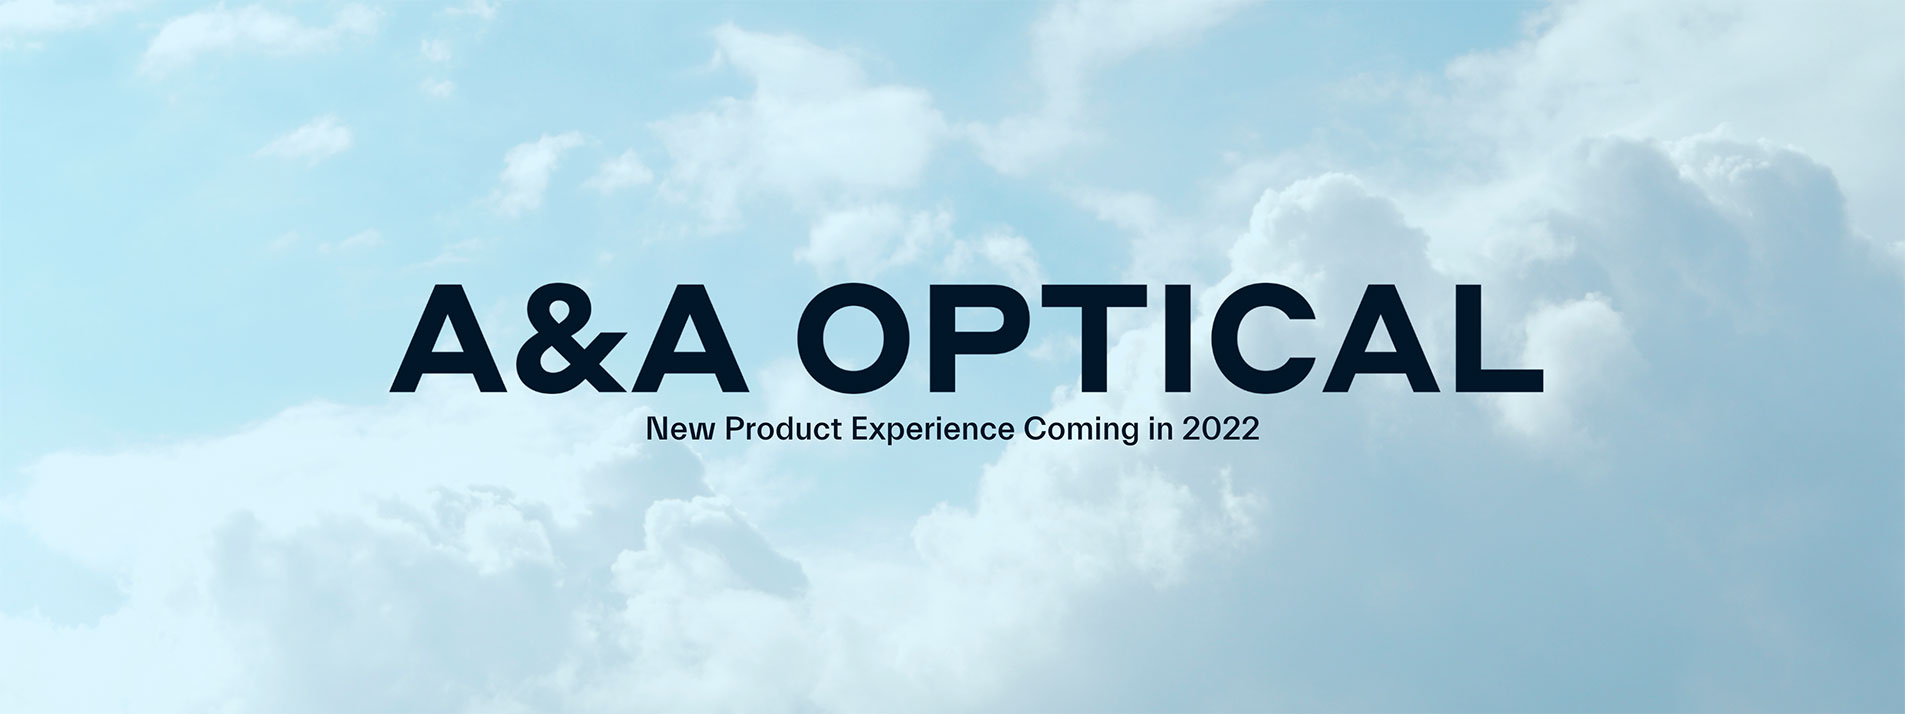 A&A OPTICAL. New Product Experience Coming in 2022.